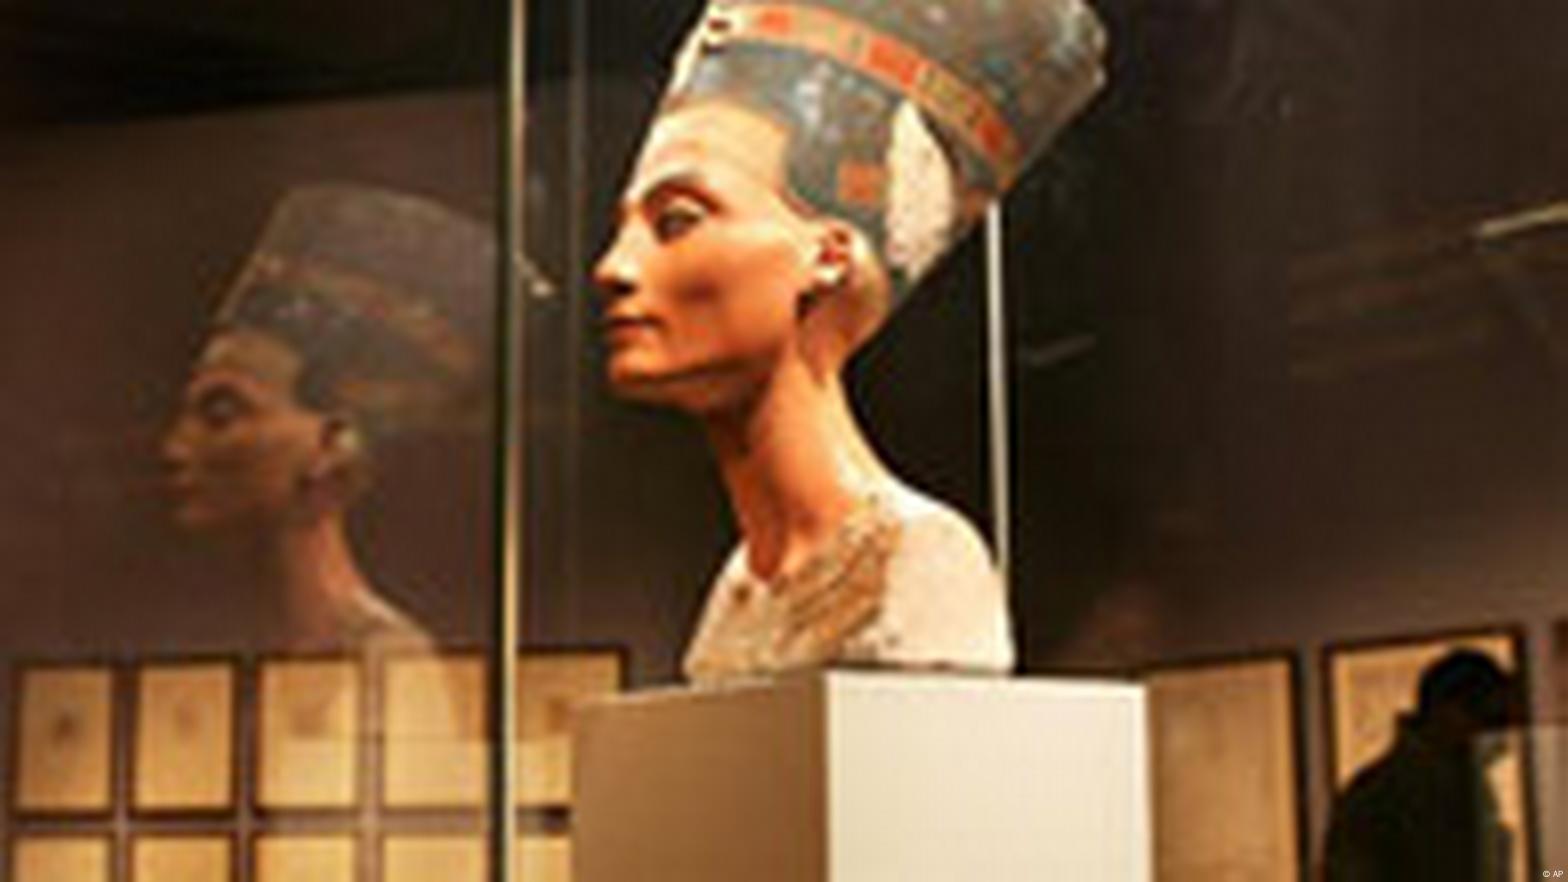 Egypt renews demands to retrieve Nefertiti bust from Germany - Al-Monitor:  Independent, trusted coverage of the Middle East